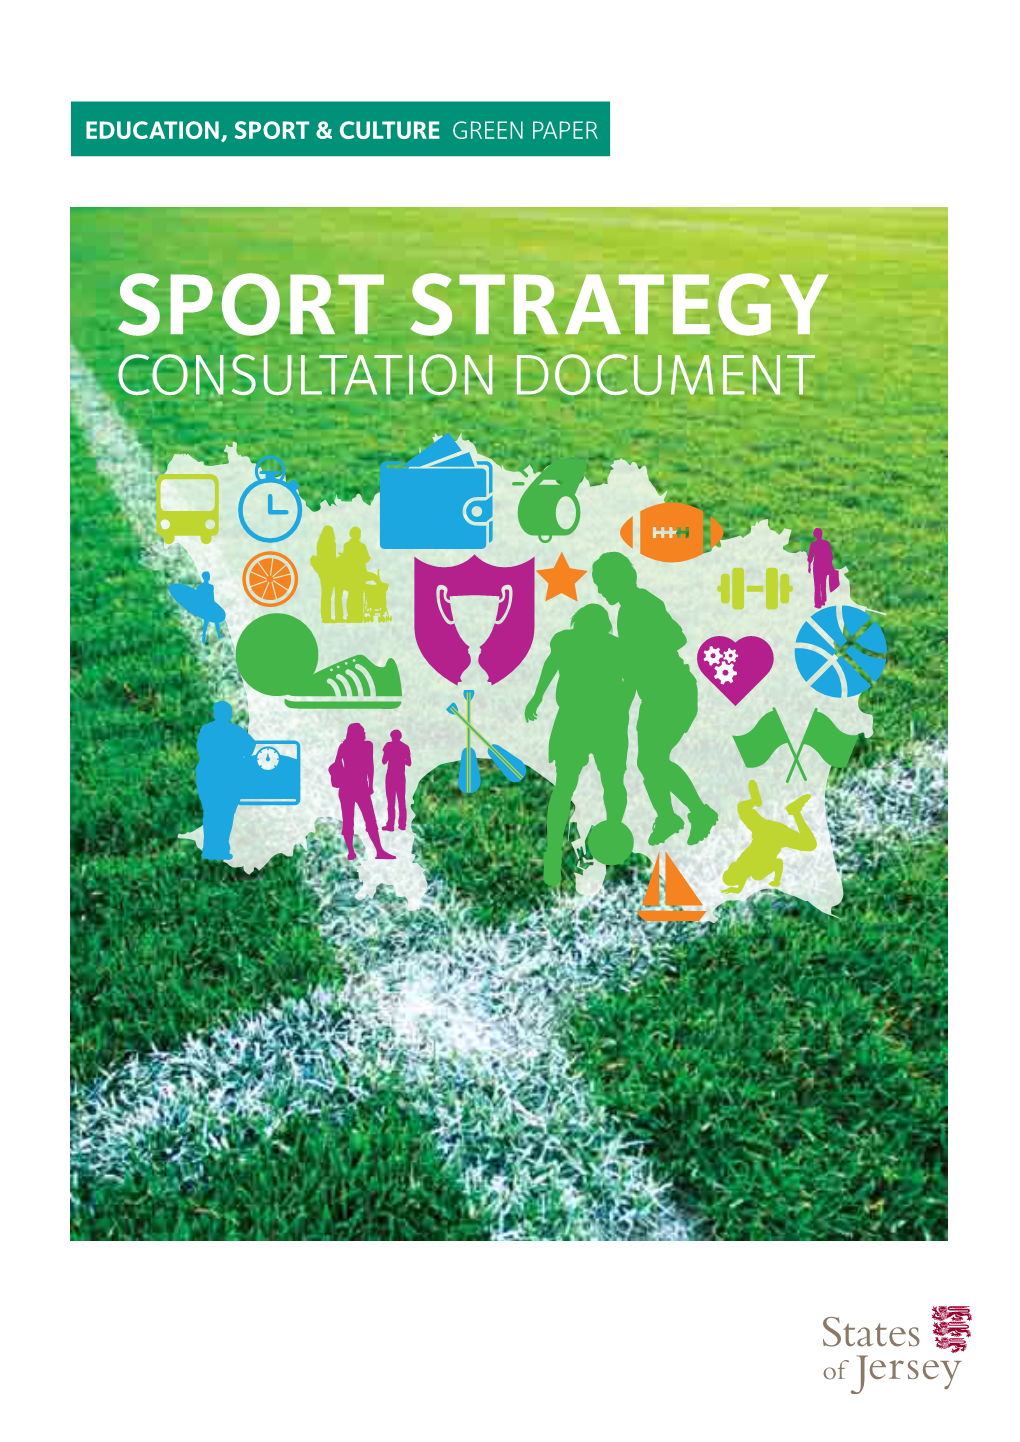 SPORT STRATEGY CONSULTATION DOCUMENT the Impact of Sport Reaches Well Beyond the Individuals Who Take Part